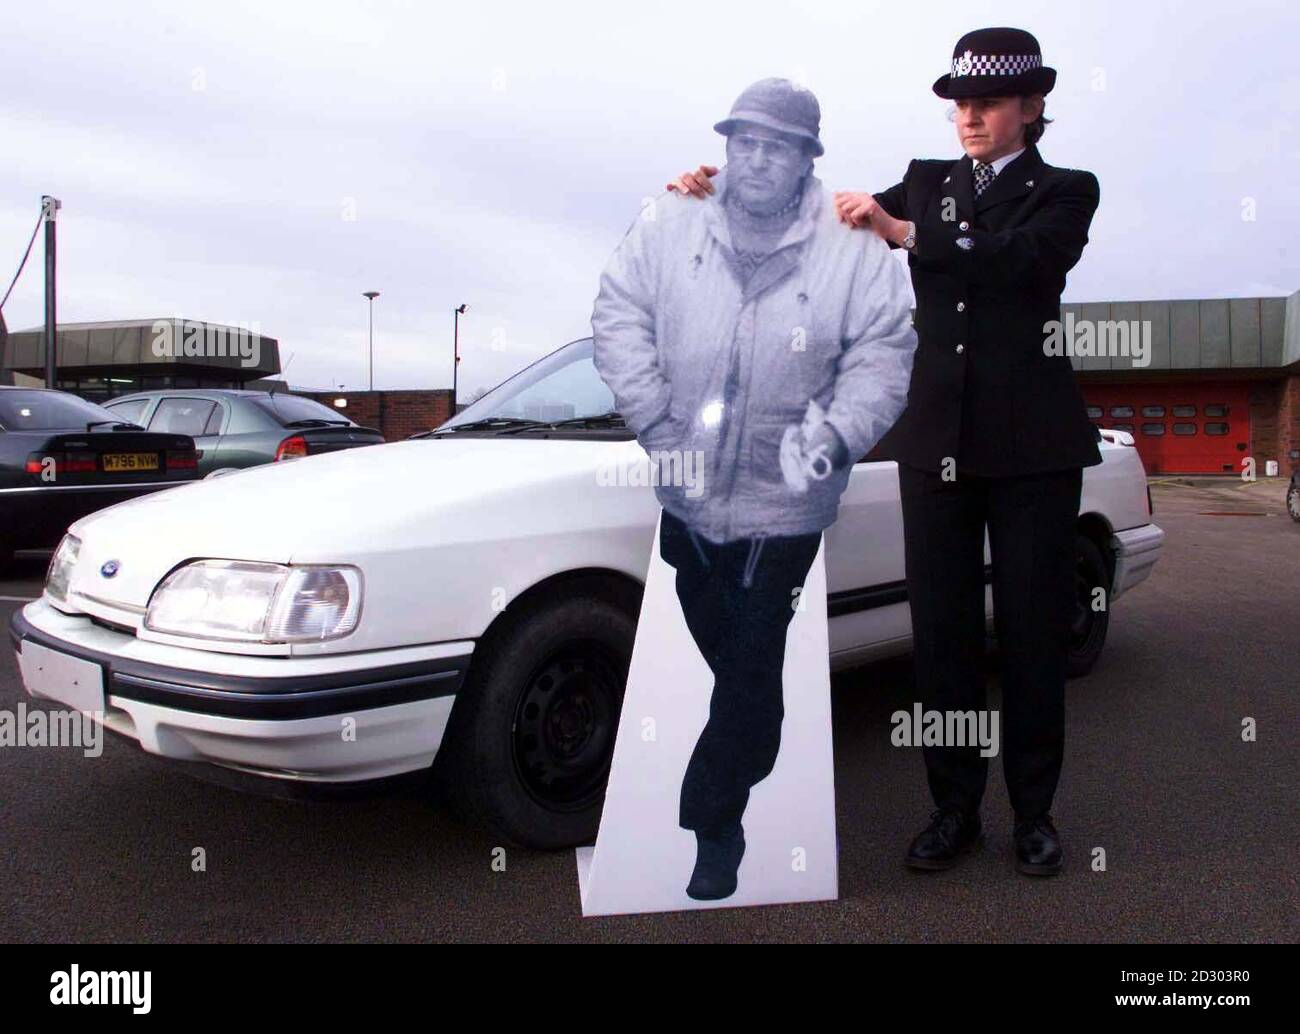 Staffordshire Police working on Operation Tornado held a press conference about armed robberies of building societies across central and northern england and north wales. They released a life size cardboard cut-out of the suspect and details of his car. Stock Photo